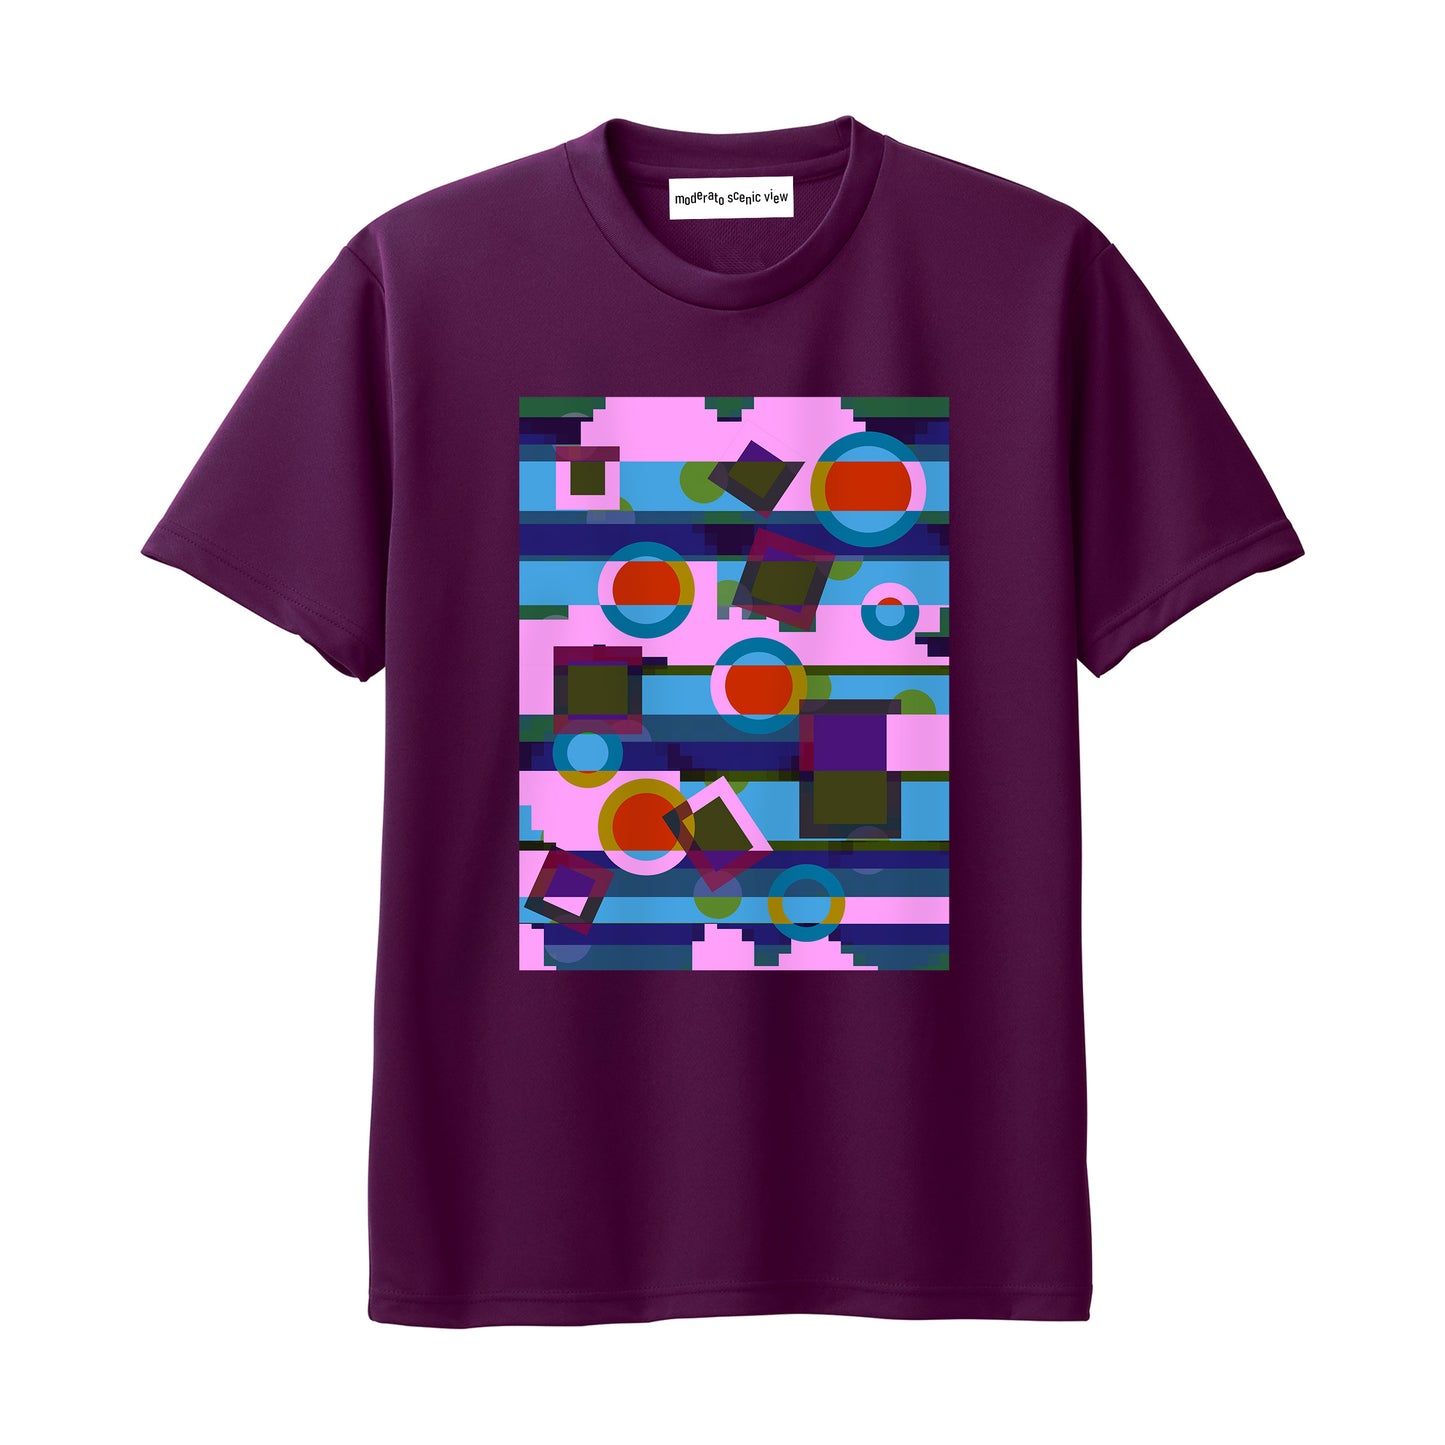 [moderato scenic view] T-shirts [feis never hill]